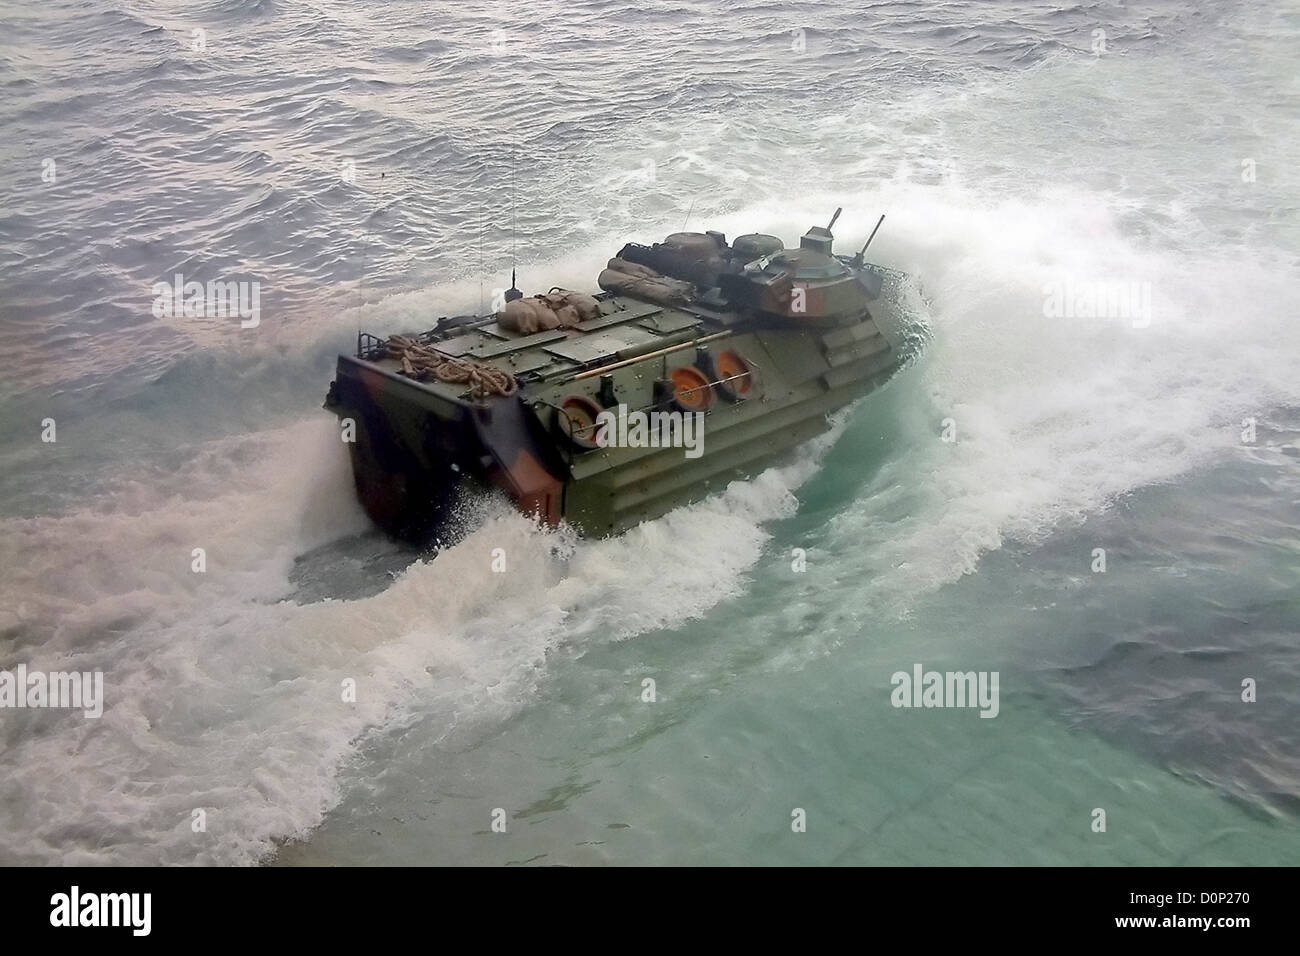 Amphibious Assault Vehicle in the Water Stock Photo